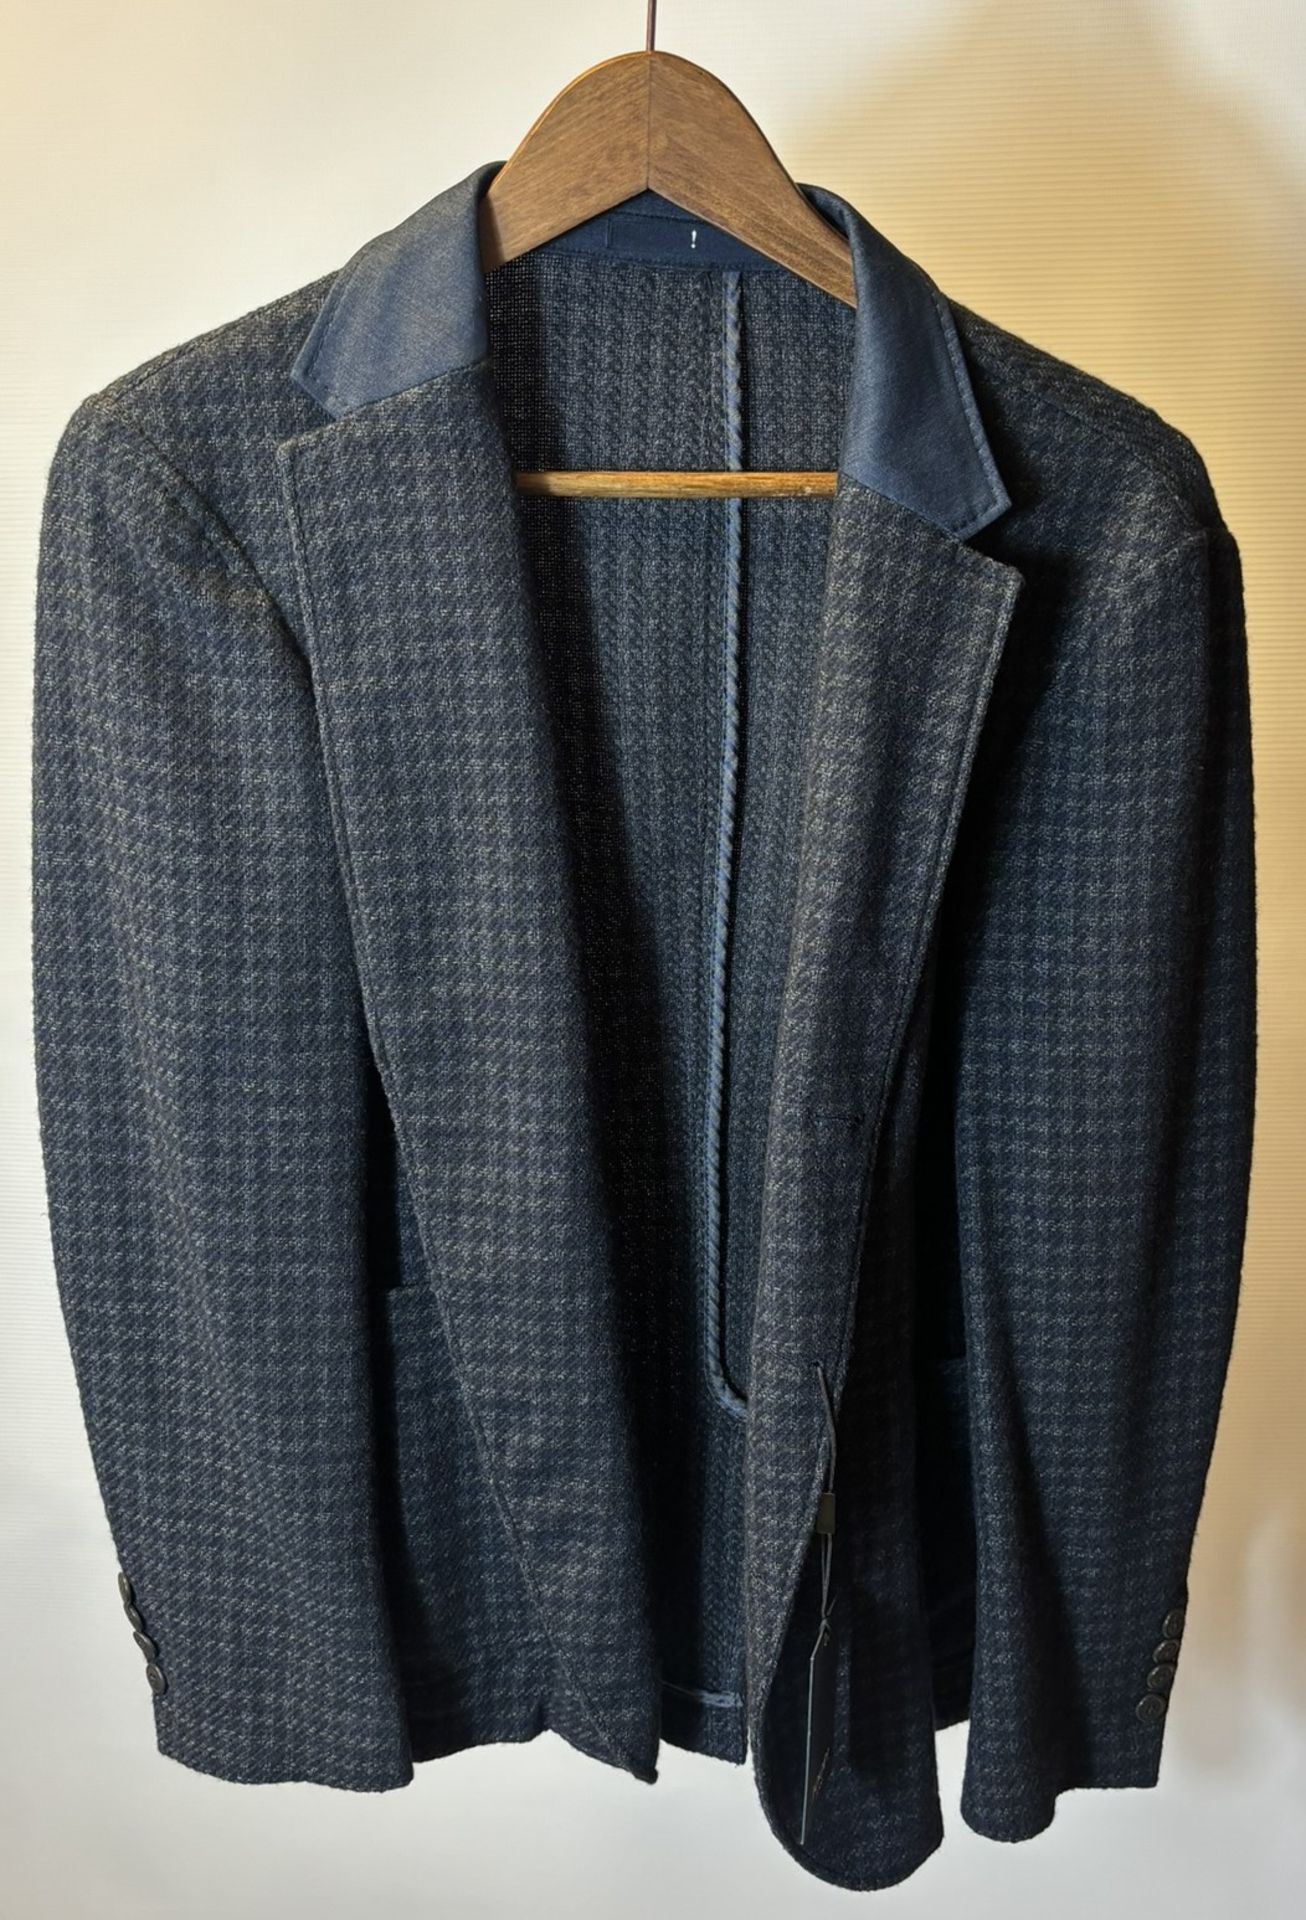 3 x Various Blazers As Seen In Photos - Image 7 of 9